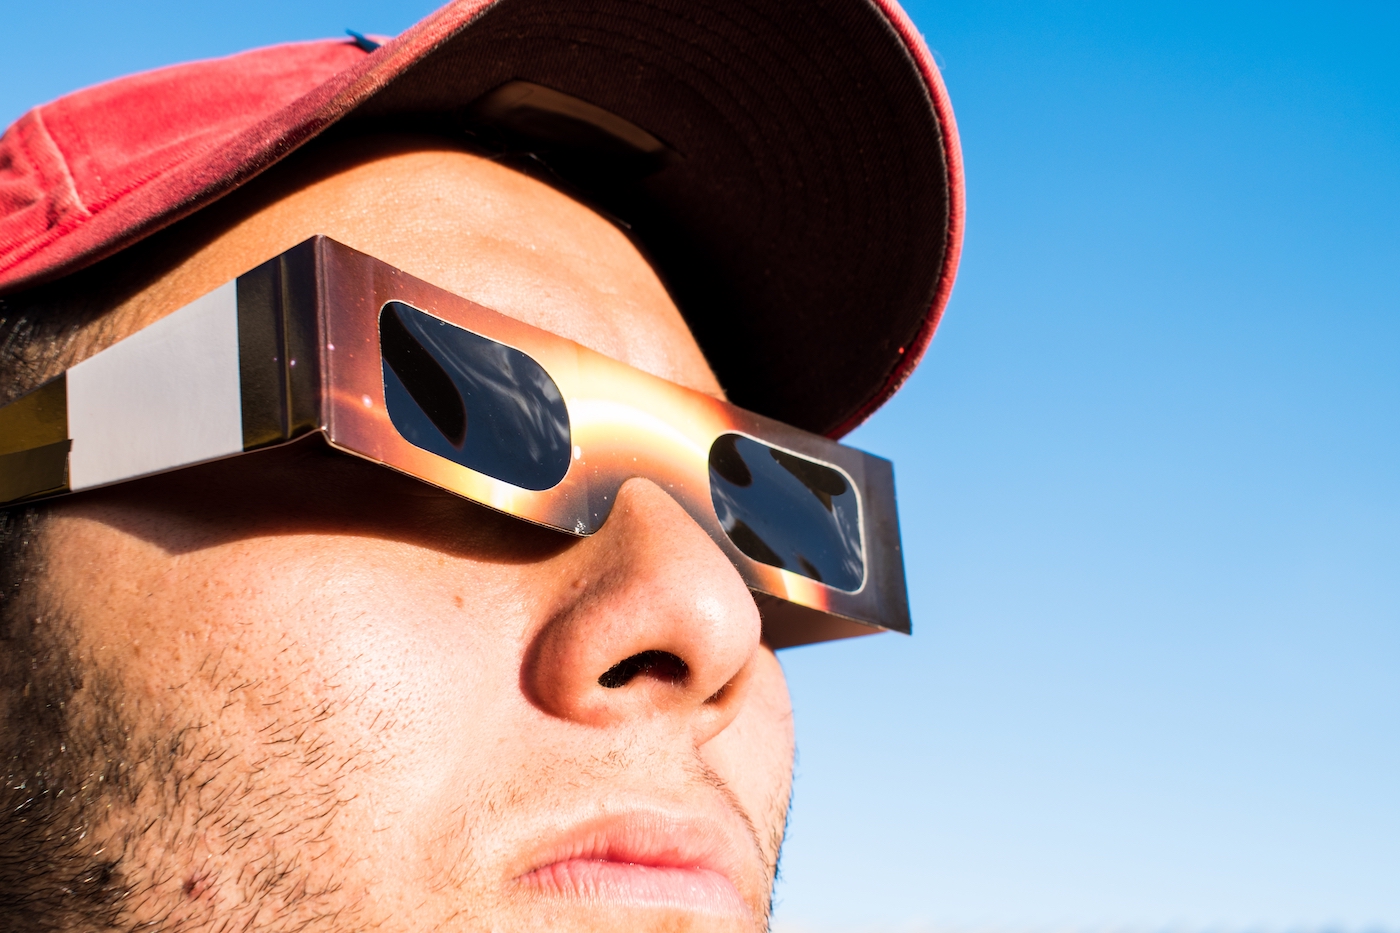 Portrait of man wearing cap and solar eclipse glasses, looking sun with blue sky at background